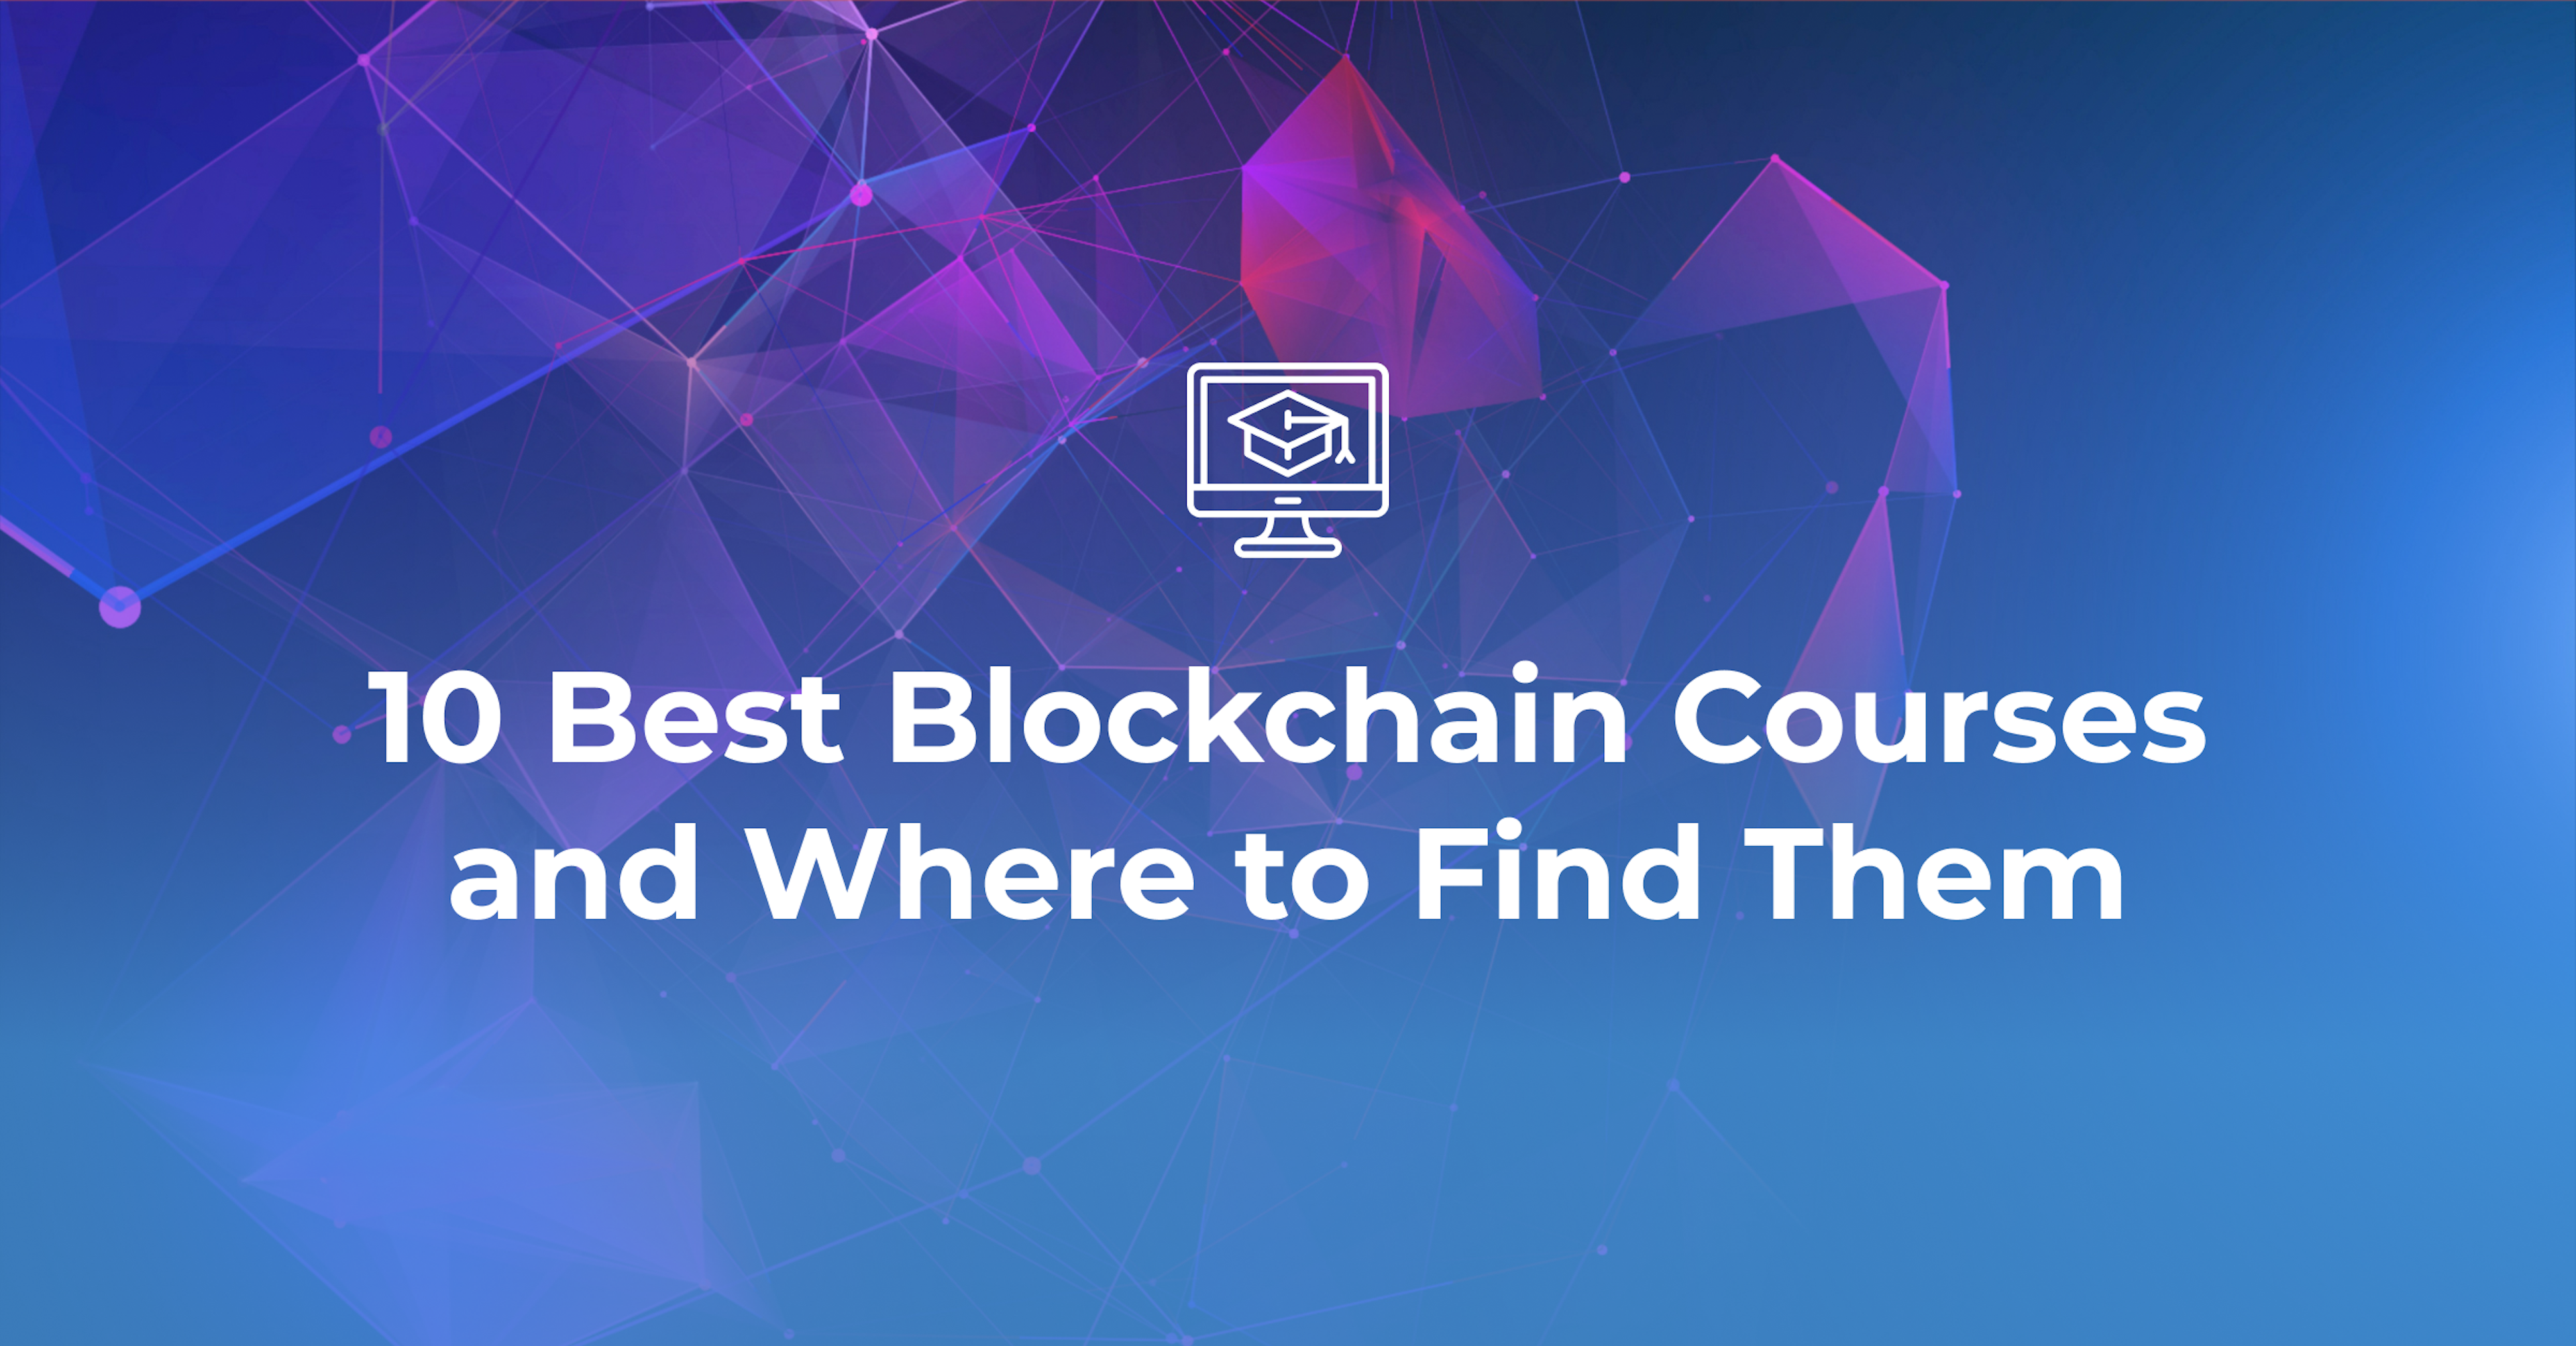 10 Best Blockchain Courses and Where to Find Them